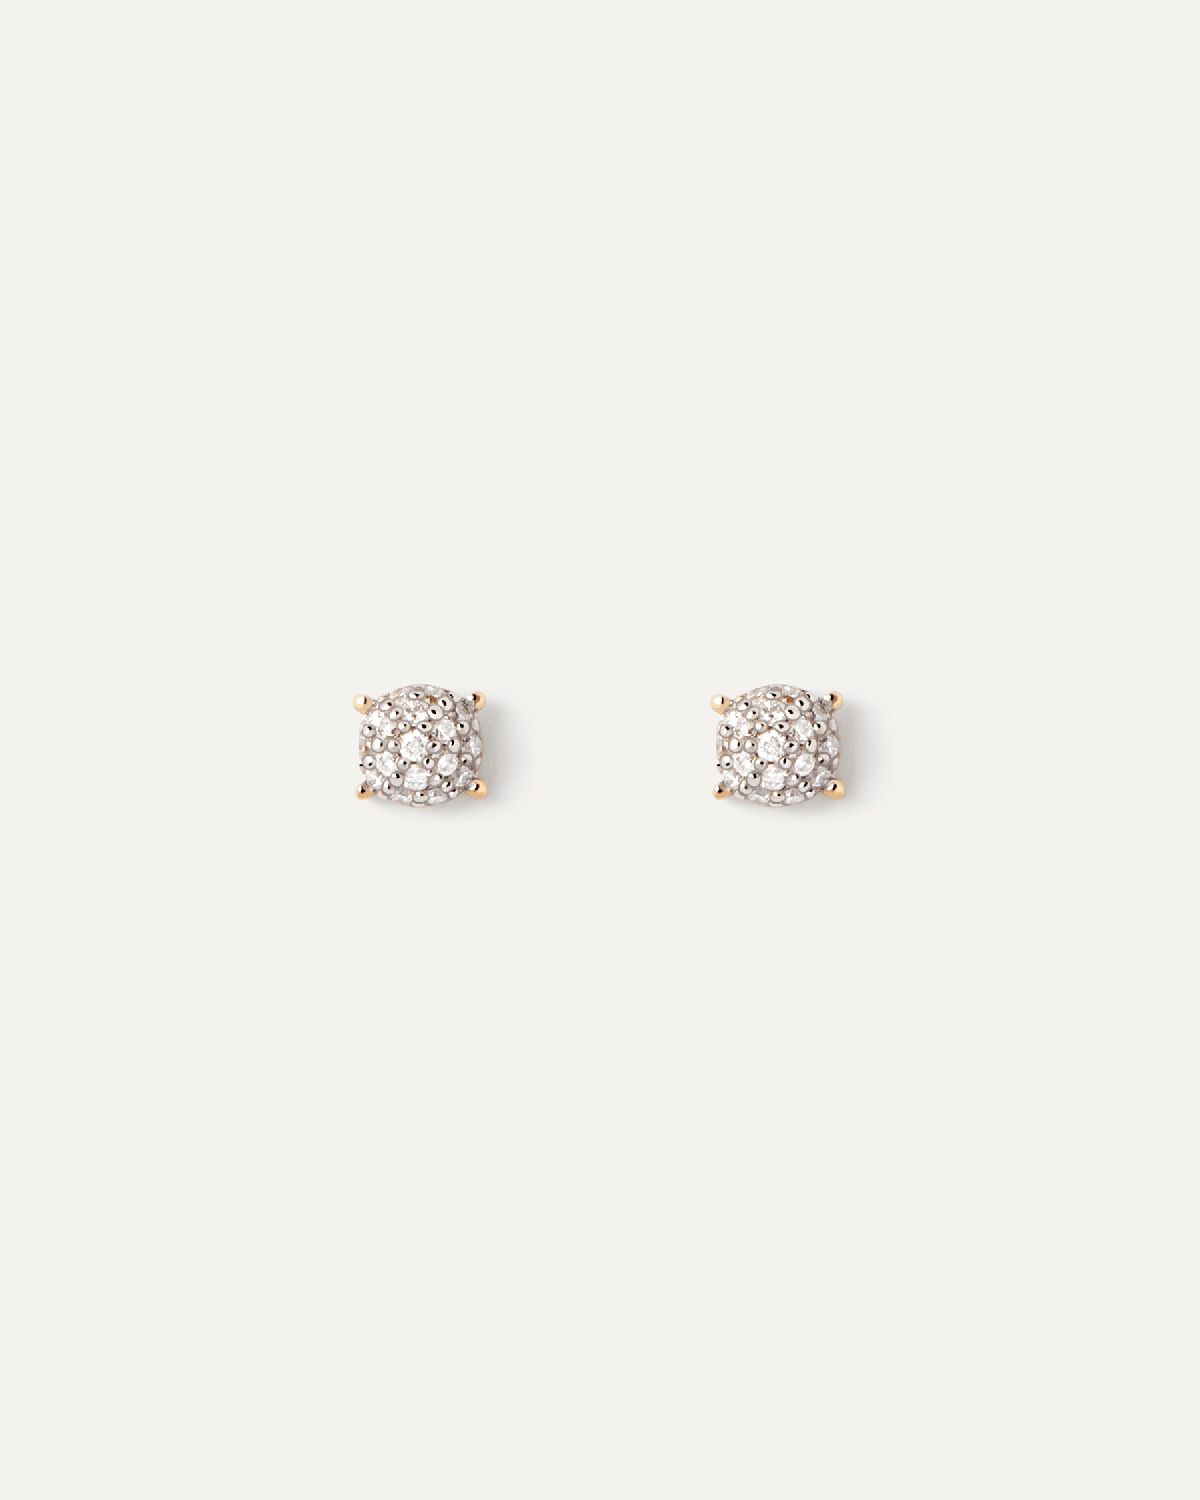 Diamonds and gold Dona stud earrings.  Minimalist round stud earrings in solid yellow gold set with a pavé lab-grown diamond  . Get the latest arrival from PDPAOLA. Place your order safely and get this Best Seller.